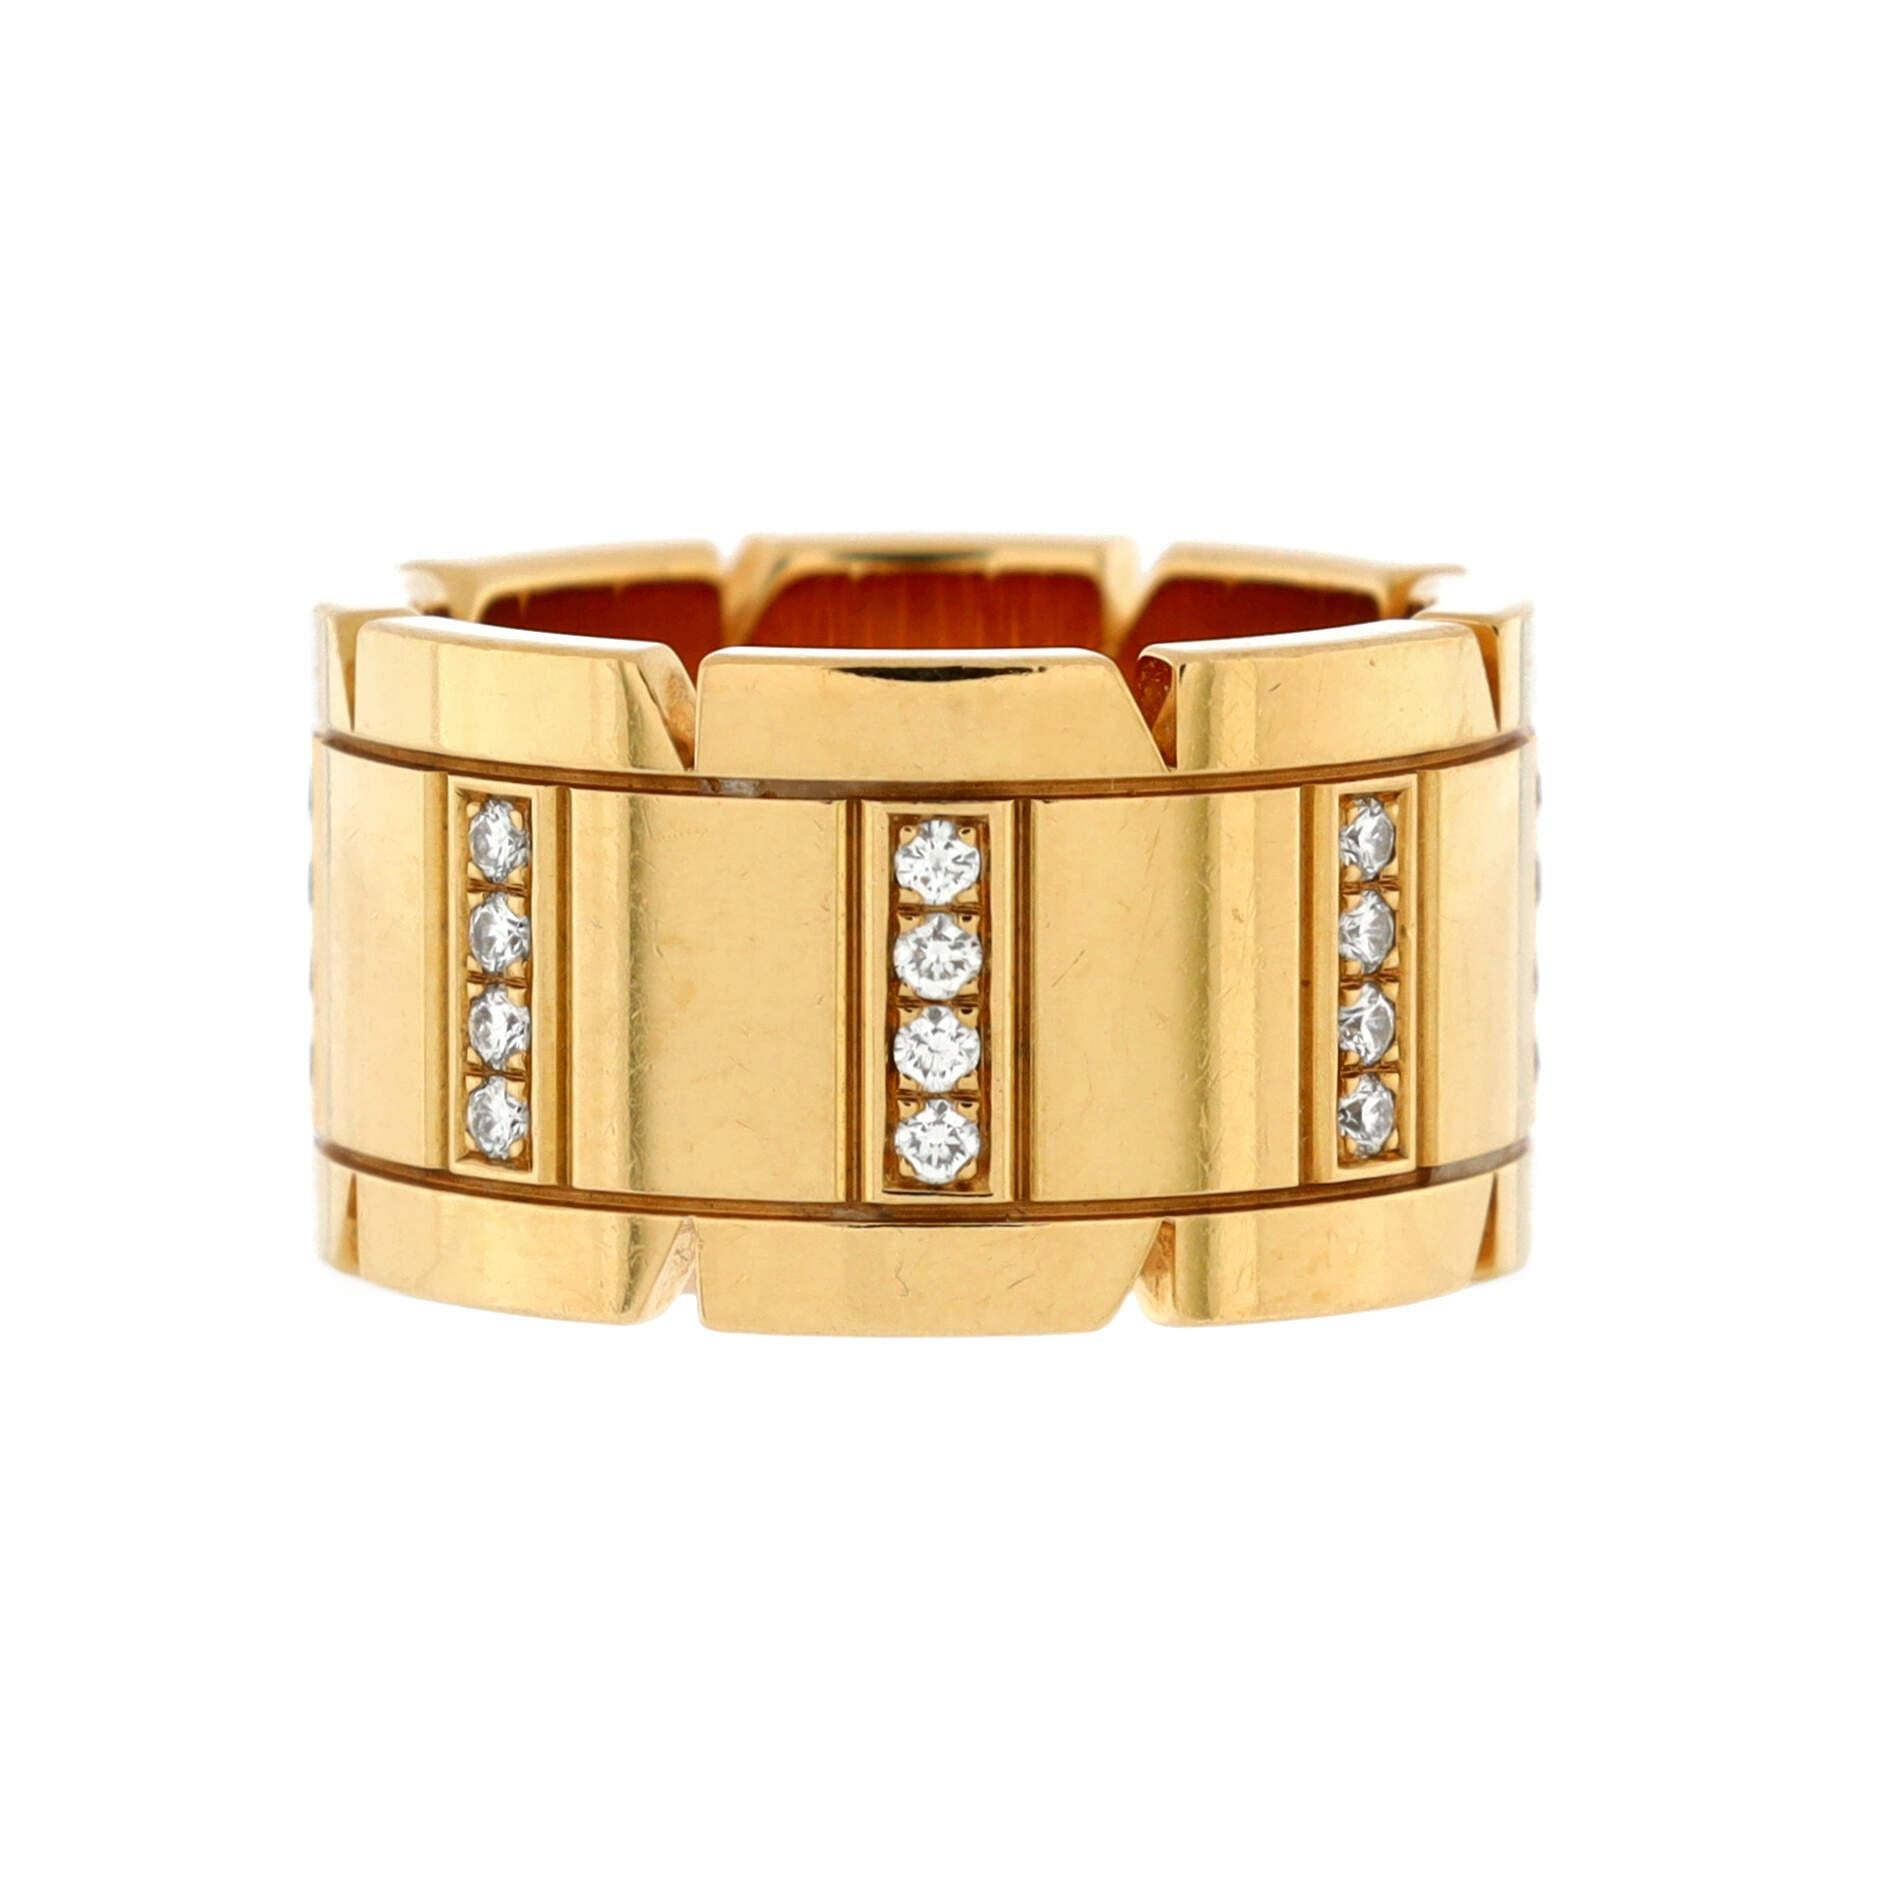 Condition: Very good. Moderate wear throughout.
Accessories: No Accessories
Measurements: Size: 5.75 - 51, Width: 11.05 mm
Designer: Cartier
Model: Tank Francaise Ring 18K Yellow Gold with Diamonds Wide
Exterior Color: Yellow Gold
Item Number: